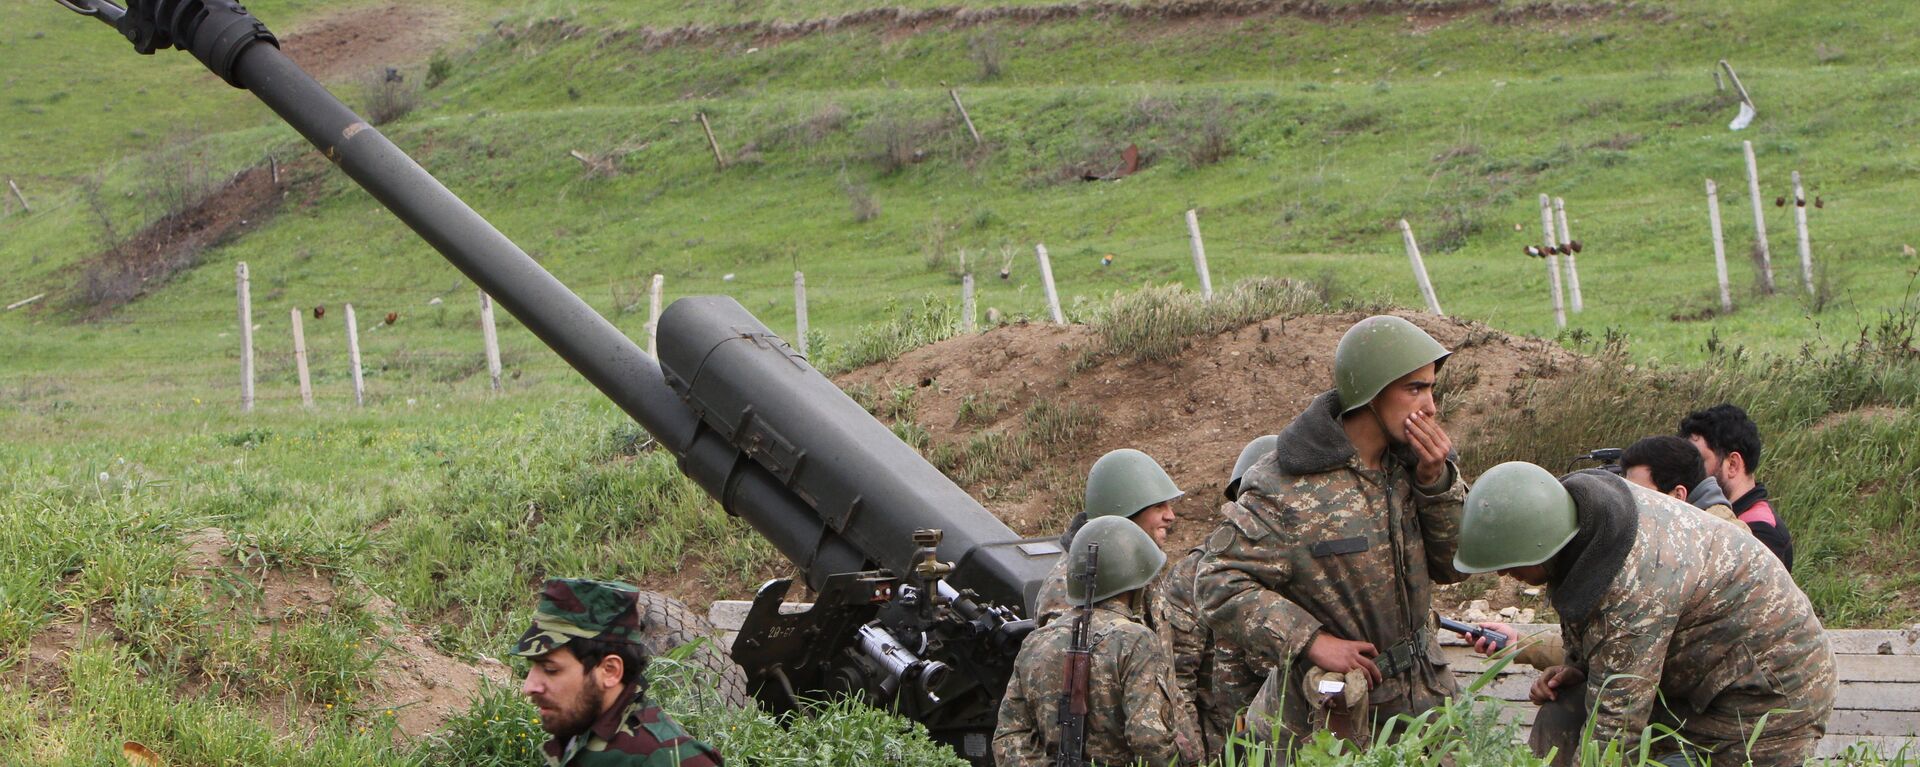 Karabakh Armenian soldiers stand near a howitzer in Hadrut province in Nagorno-Karabakh, Azerbaijan, Tuesday, April 5, 2016. Azerbaijan forces and separatist forces in Nagorno-Karabakh agreed on a cease-fire Tuesday following three days of the heaviest fighting in the region since 1994, the Azeri defense ministry announced. - Sputnik International, 1920, 22.04.2022